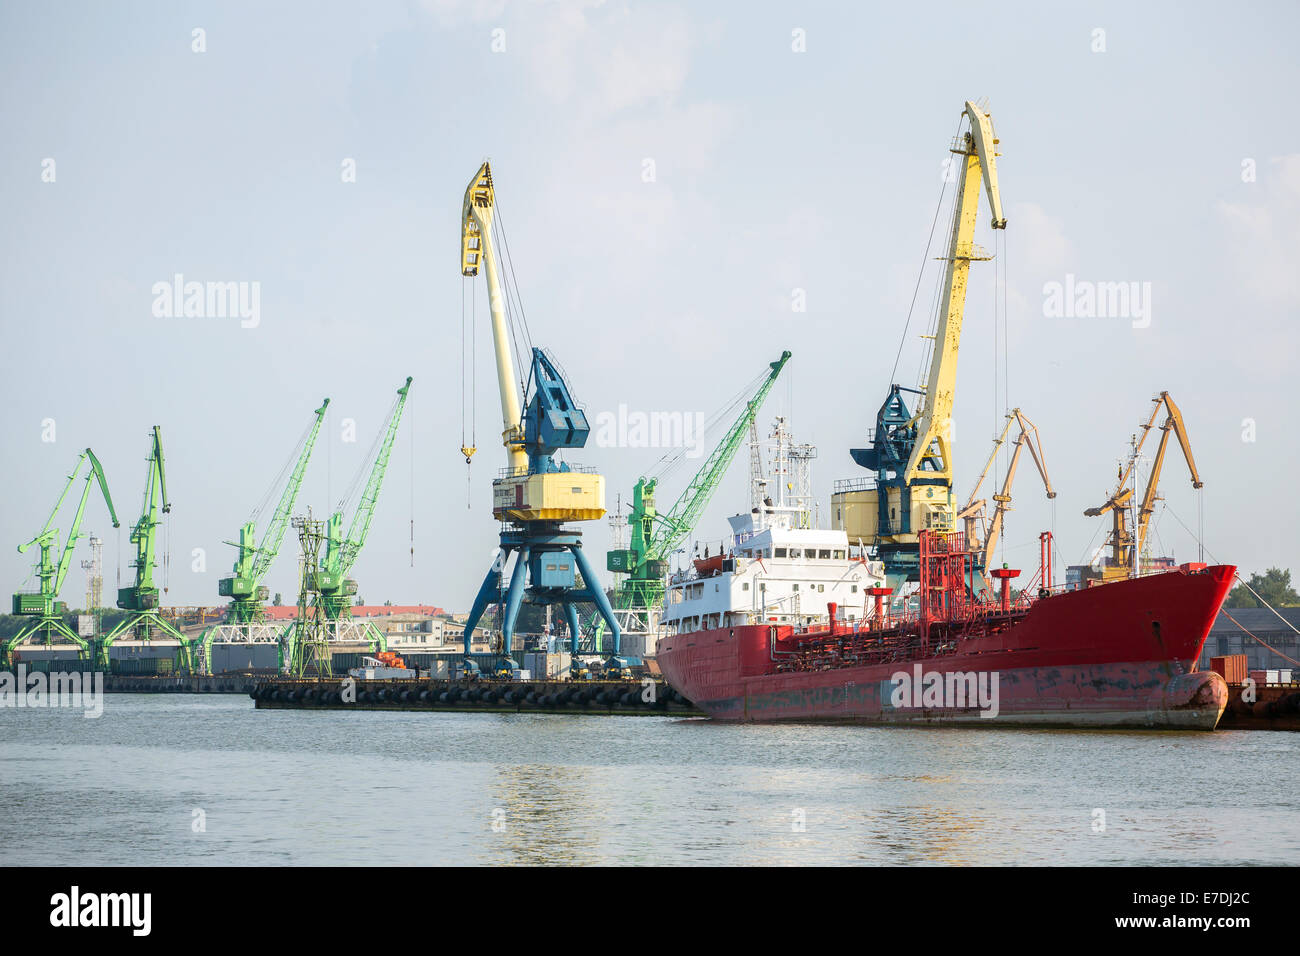 Cranes and ship in Klaipeda harbor, Lithuania Stock Photo